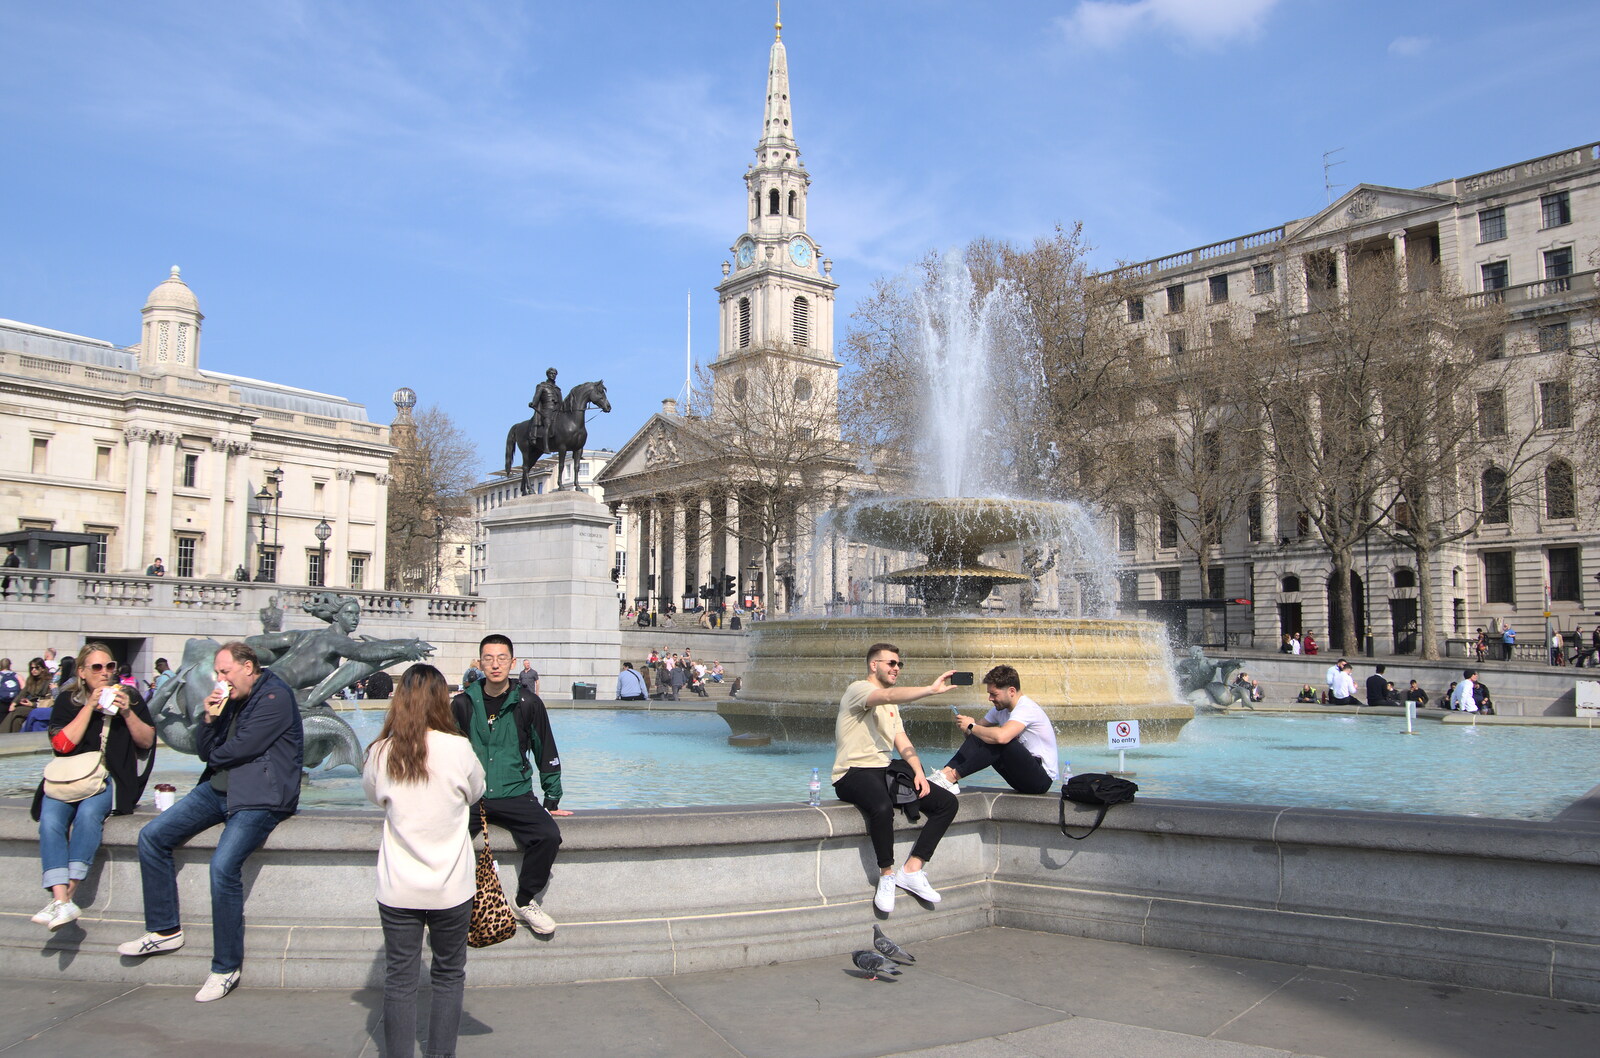 A Walk Around the South Bank, London - 25th March 2022: Tourists gets some selfies in at Trafalgar Square